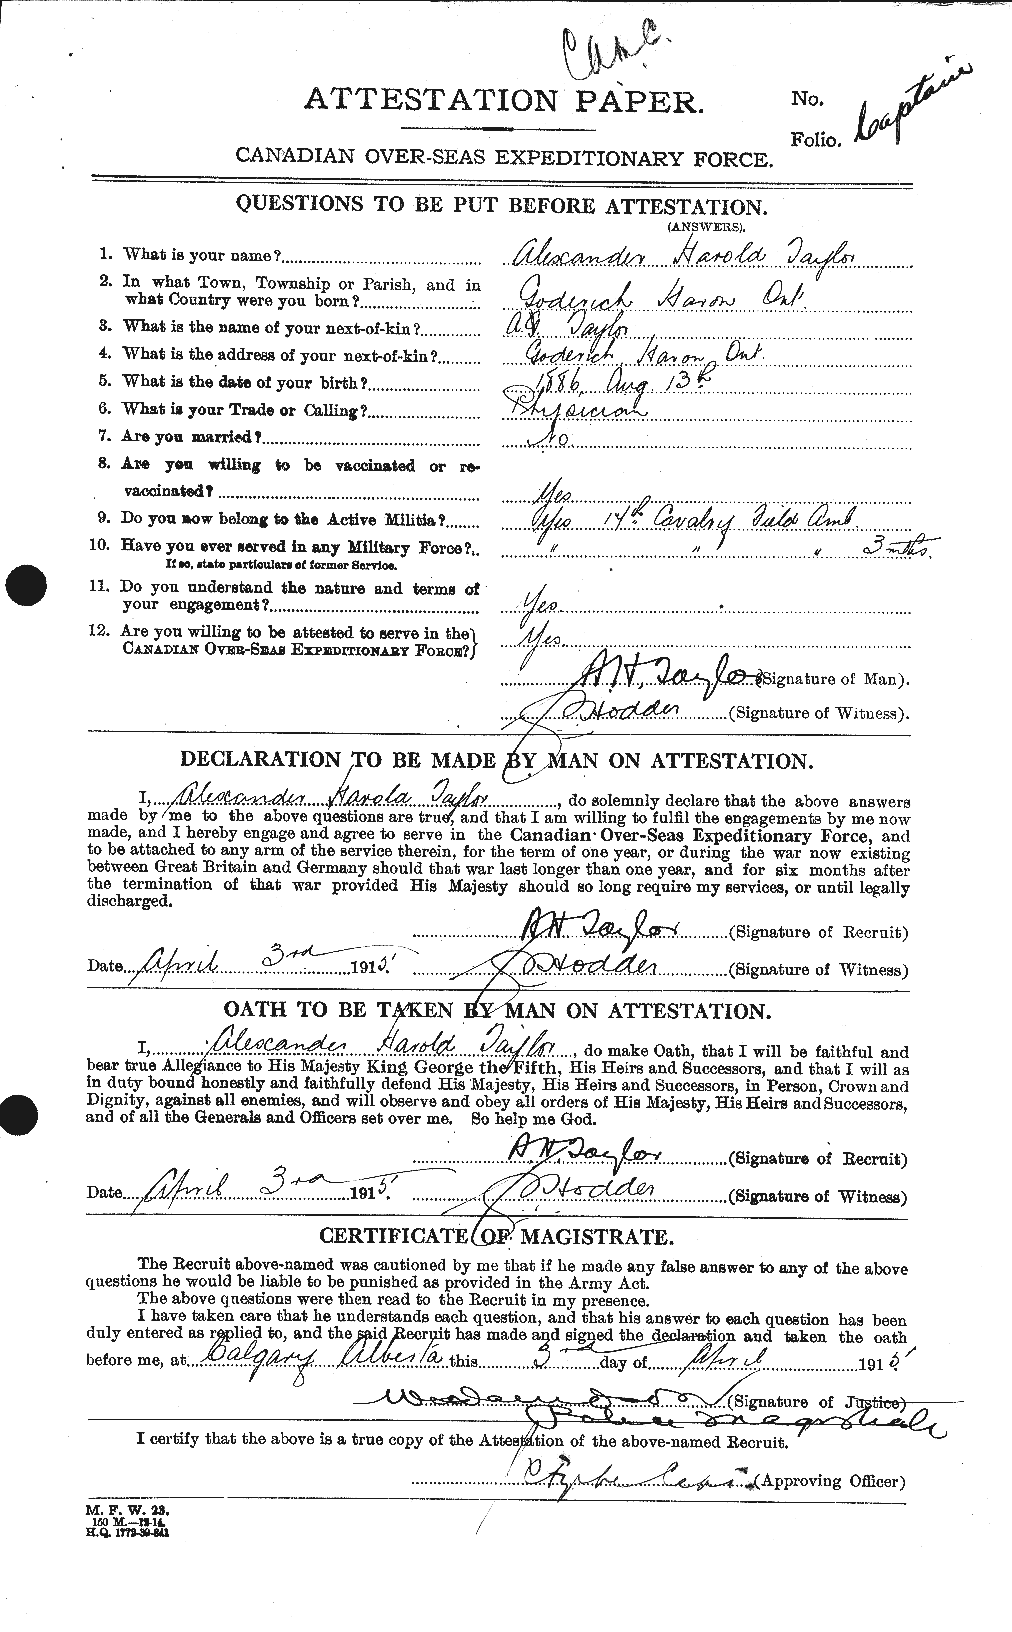 Personnel Records of the First World War - CEF 626153a